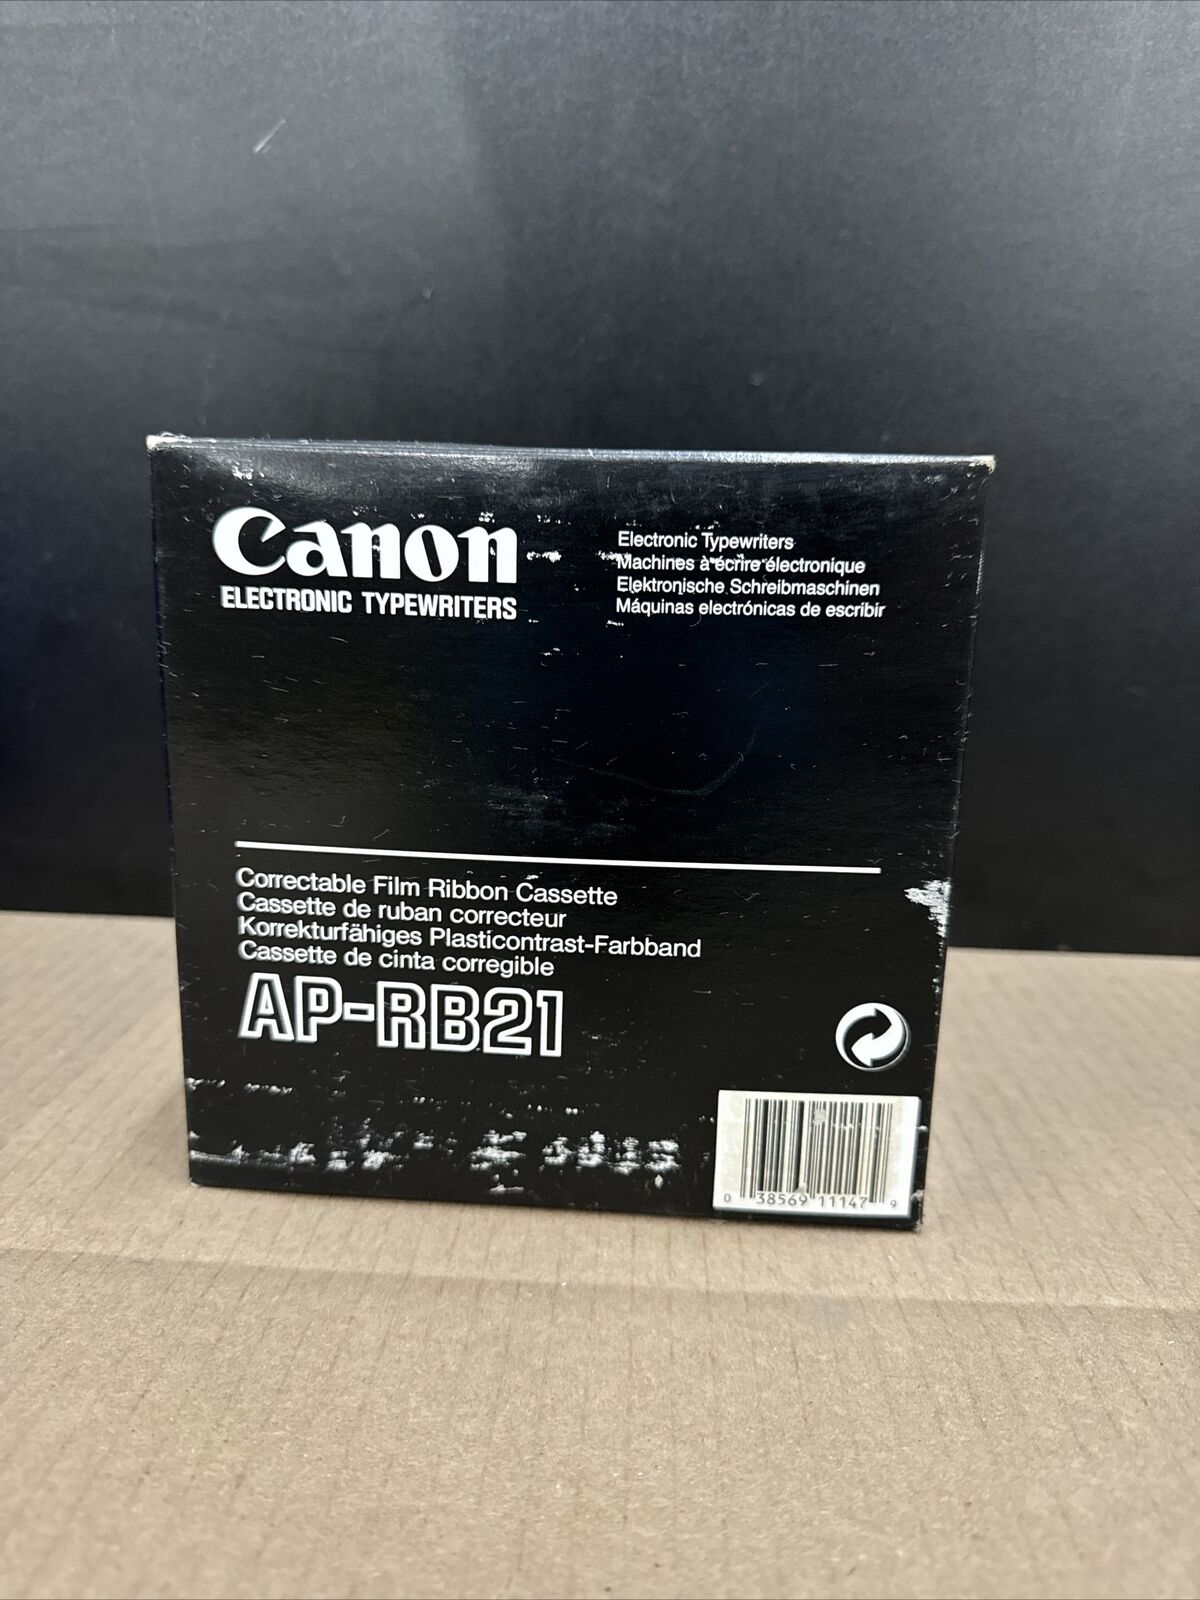 1 box of 6 Canon Electronic Typewriters Correctable Film Ribbon Cassette AP-RB21